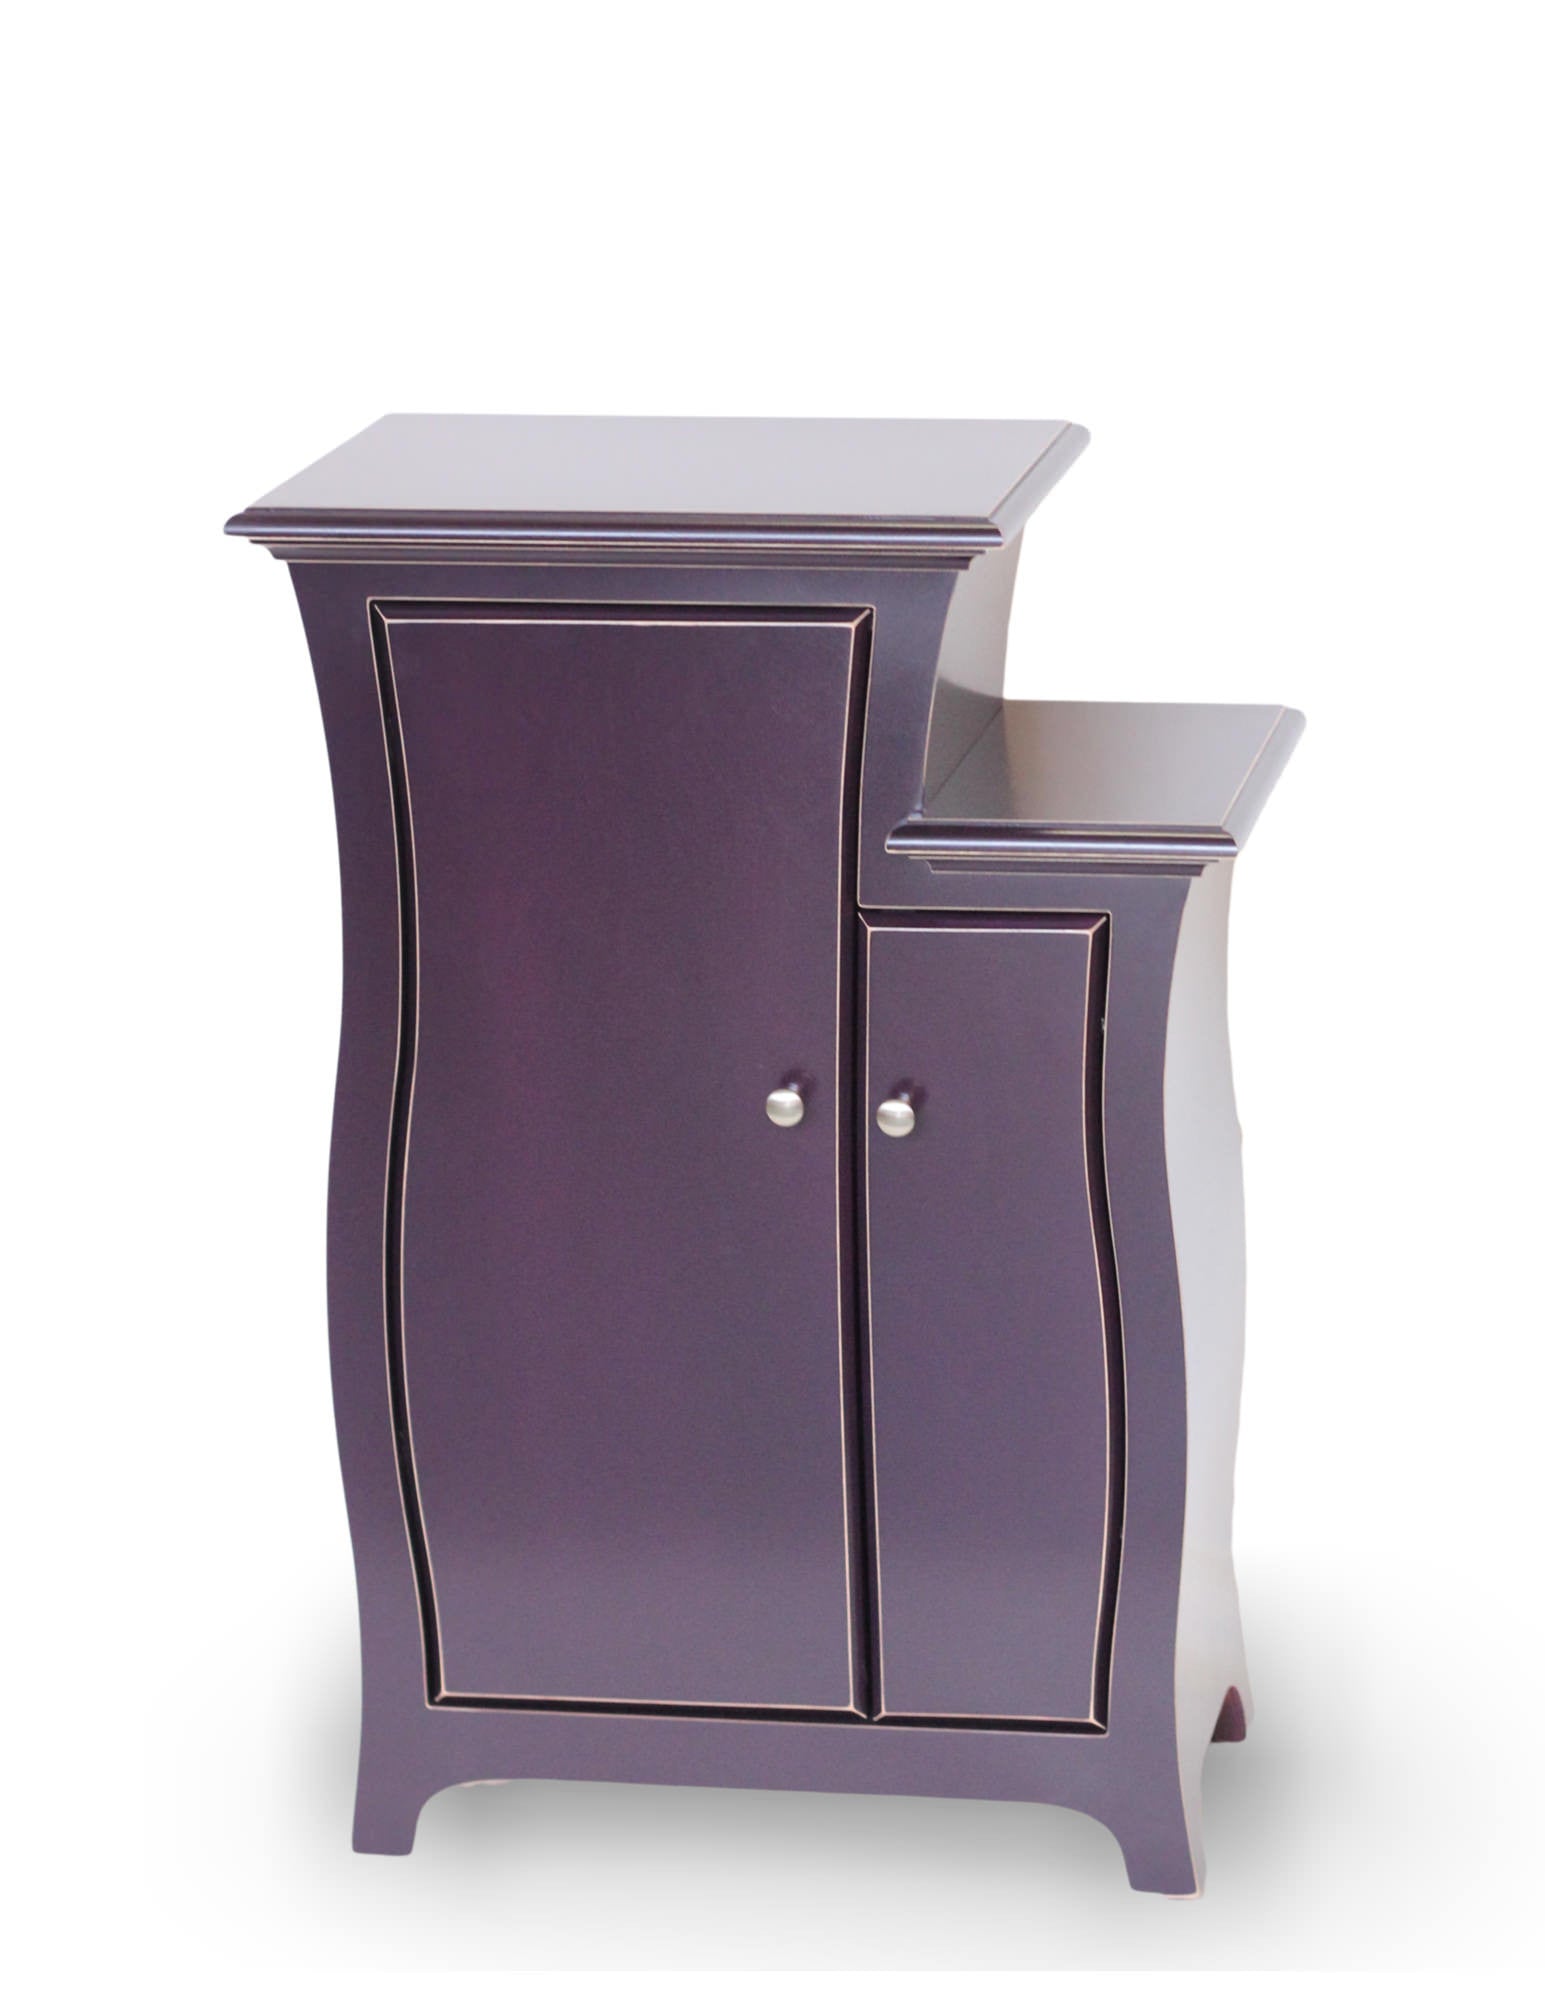 Cabinet No.1 by Dust Furniture* - Abstract traditional, stepped cabinet - Dark Violet Paint - designed by Vincent Leman